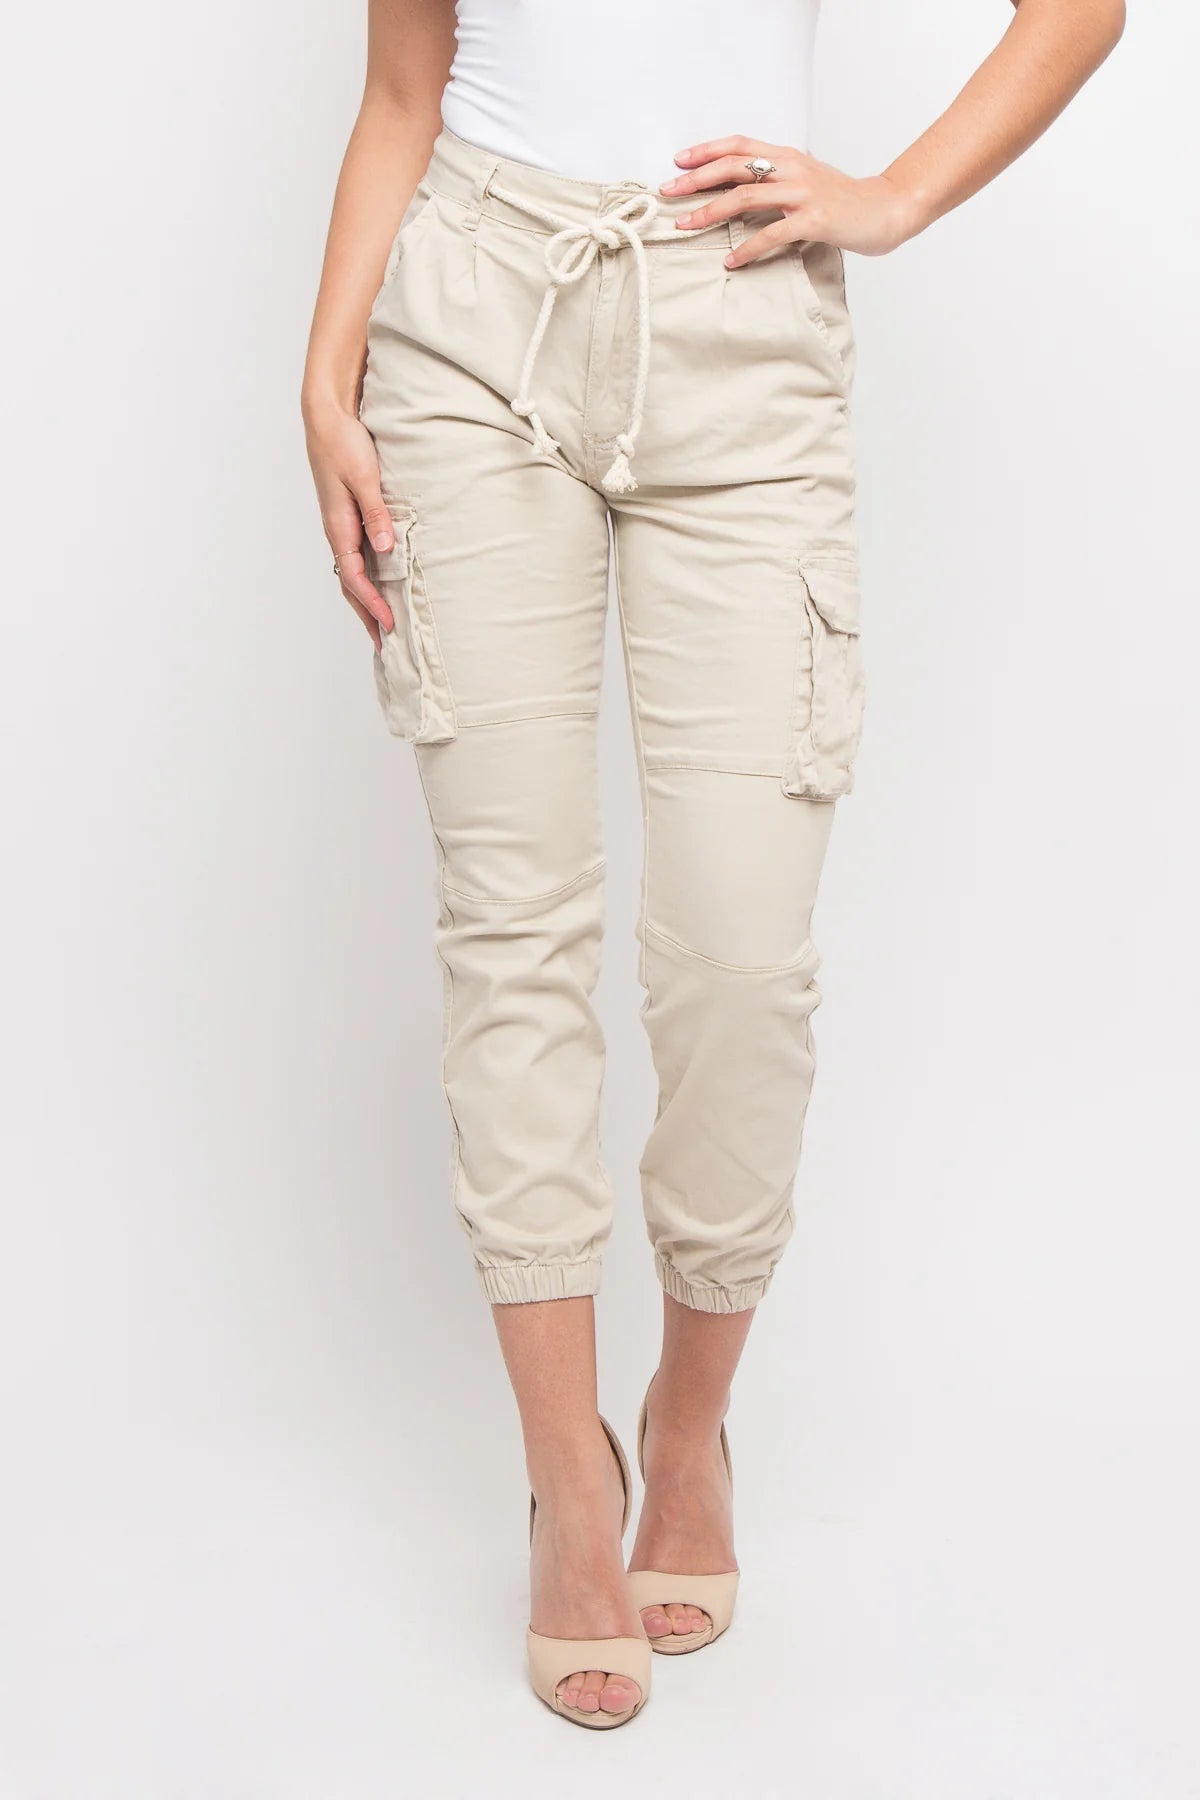 Women's Essential Basic Cropped Colored Cargo Joggers - Ivory